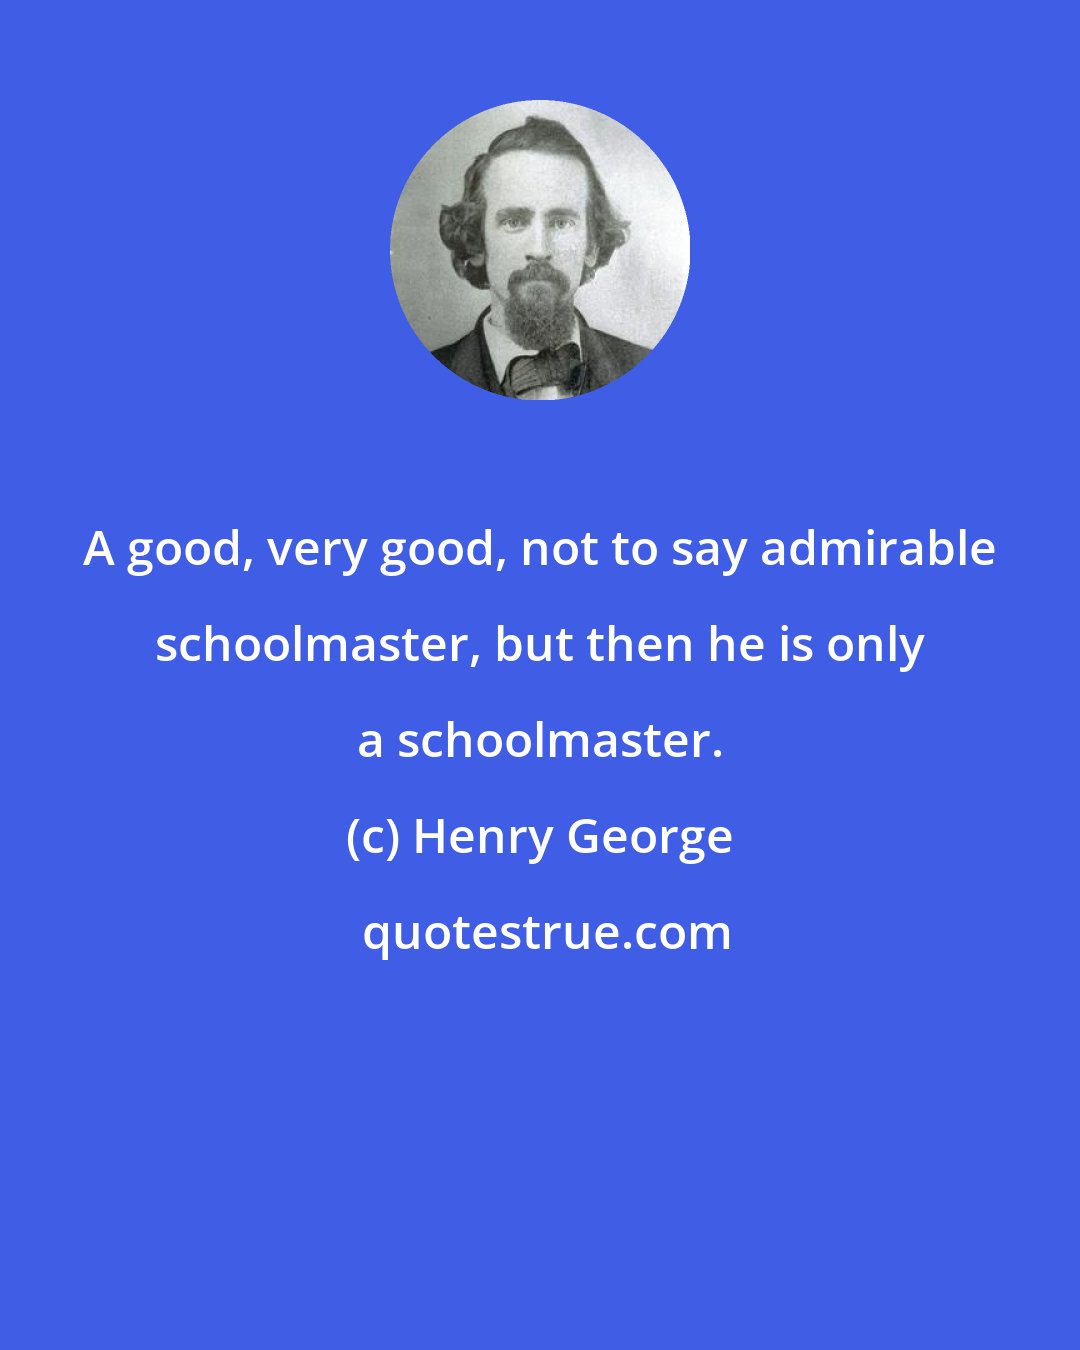 Henry George: A good, very good, not to say admirable schoolmaster, but then he is only a schoolmaster.